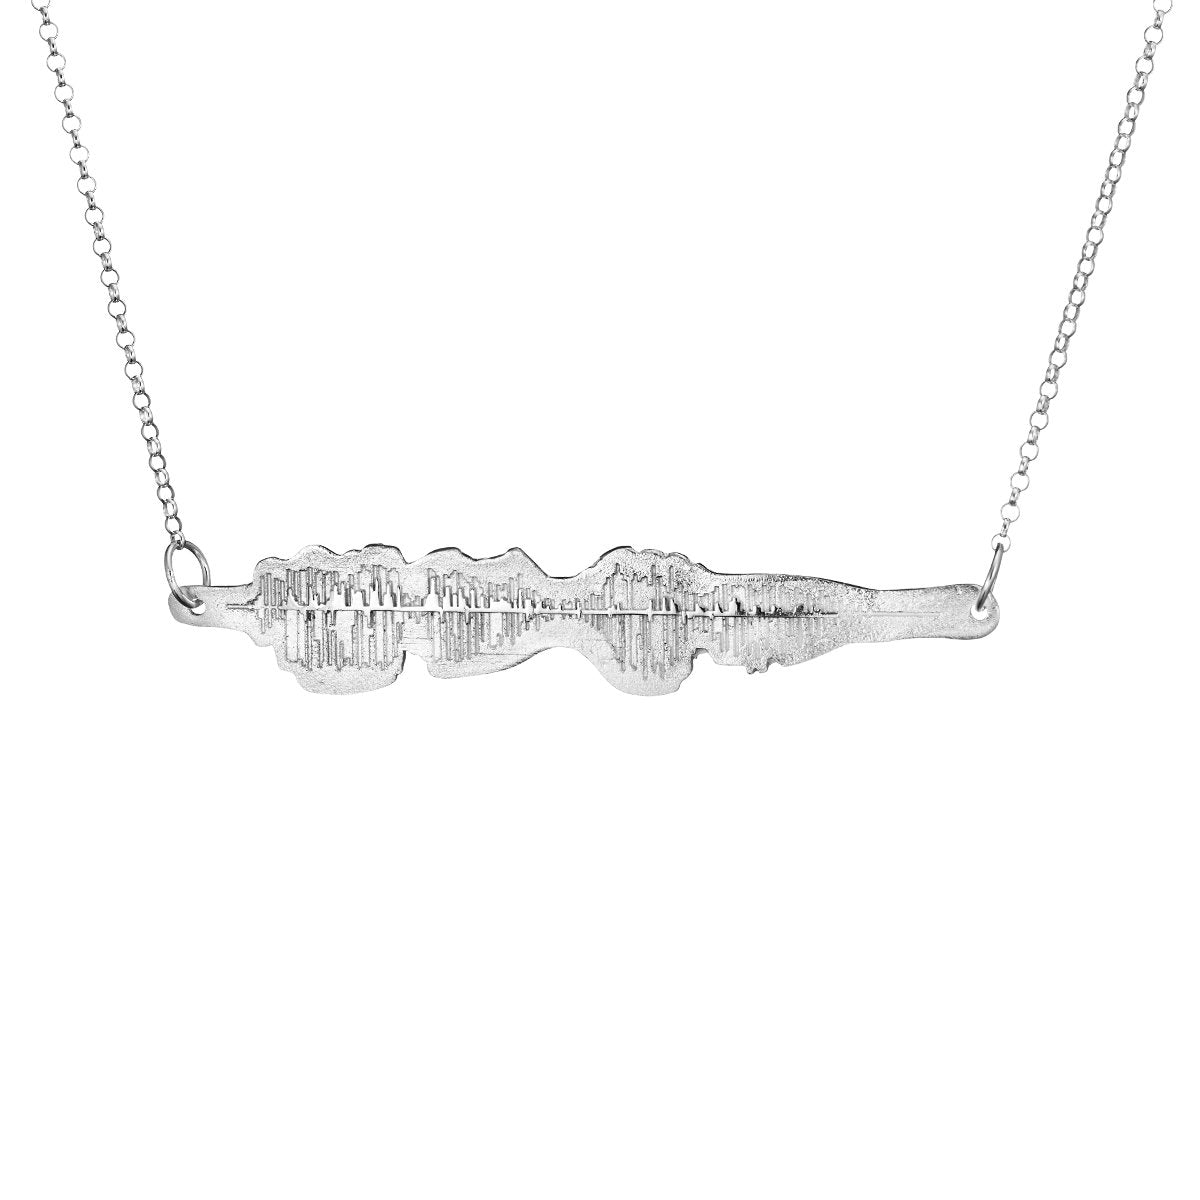 Made in Heaven necklace, silver